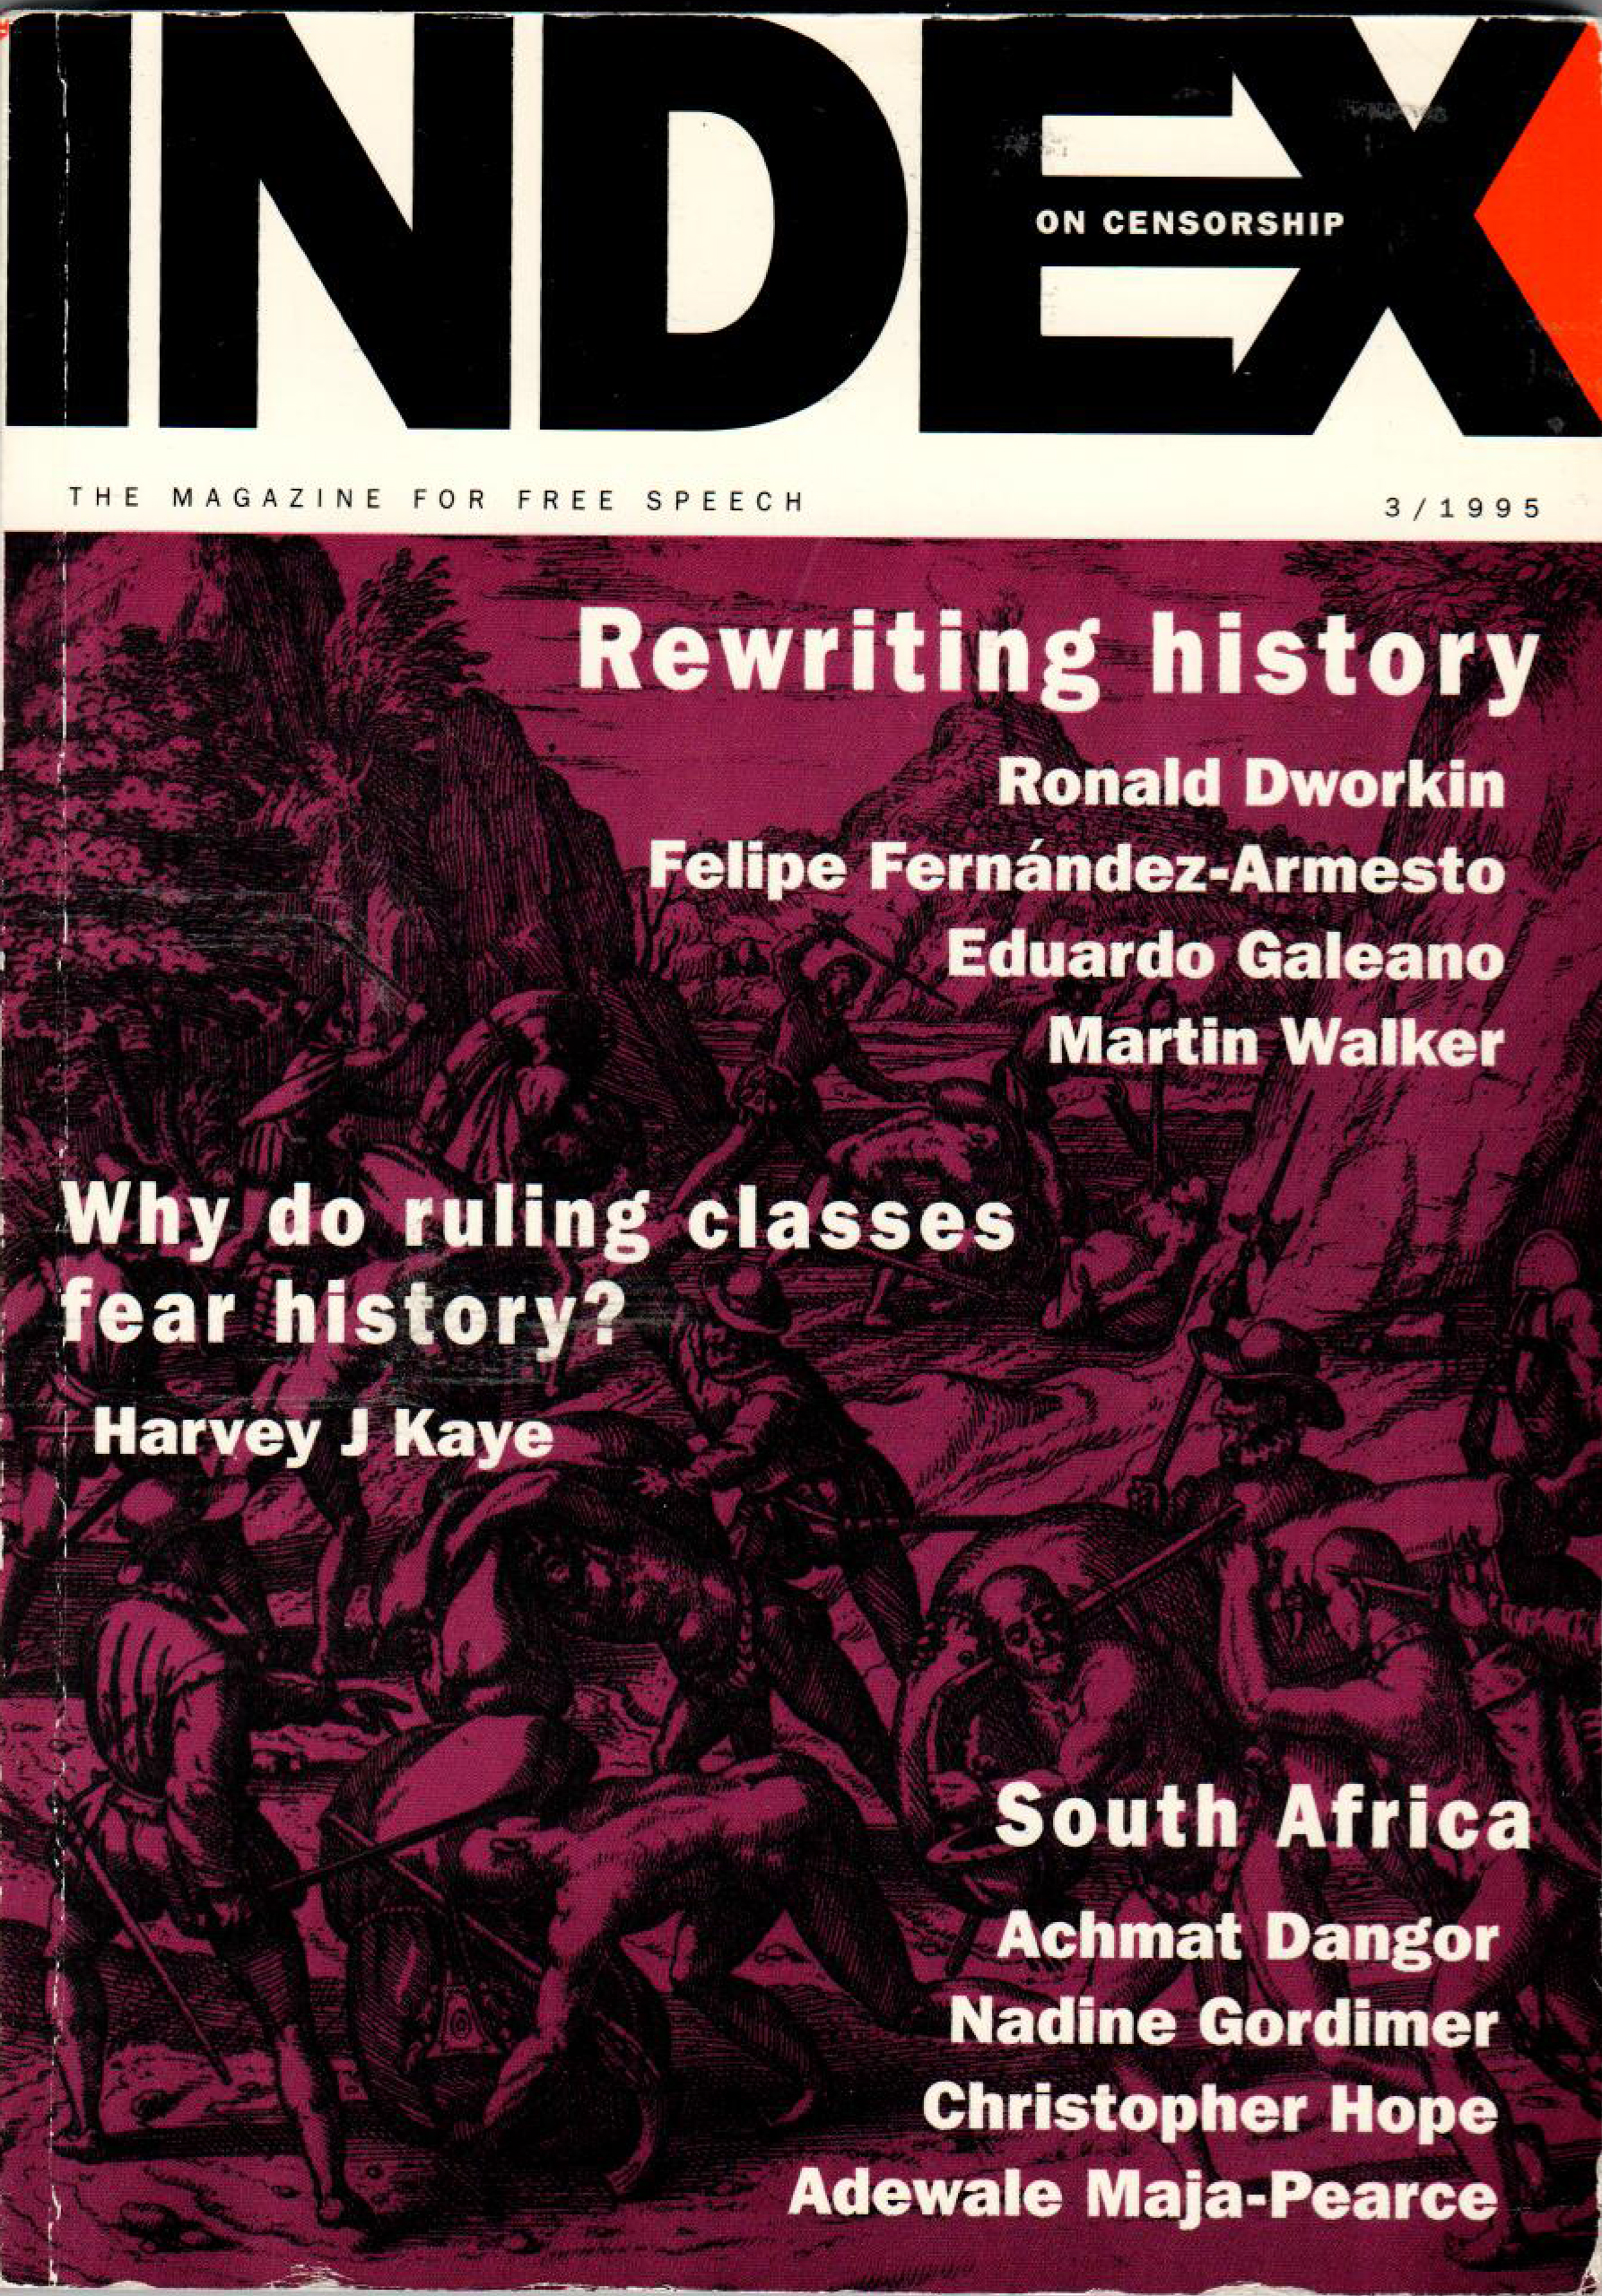 Rewriting history, the May 1995 issue of Index on Censorship magazine